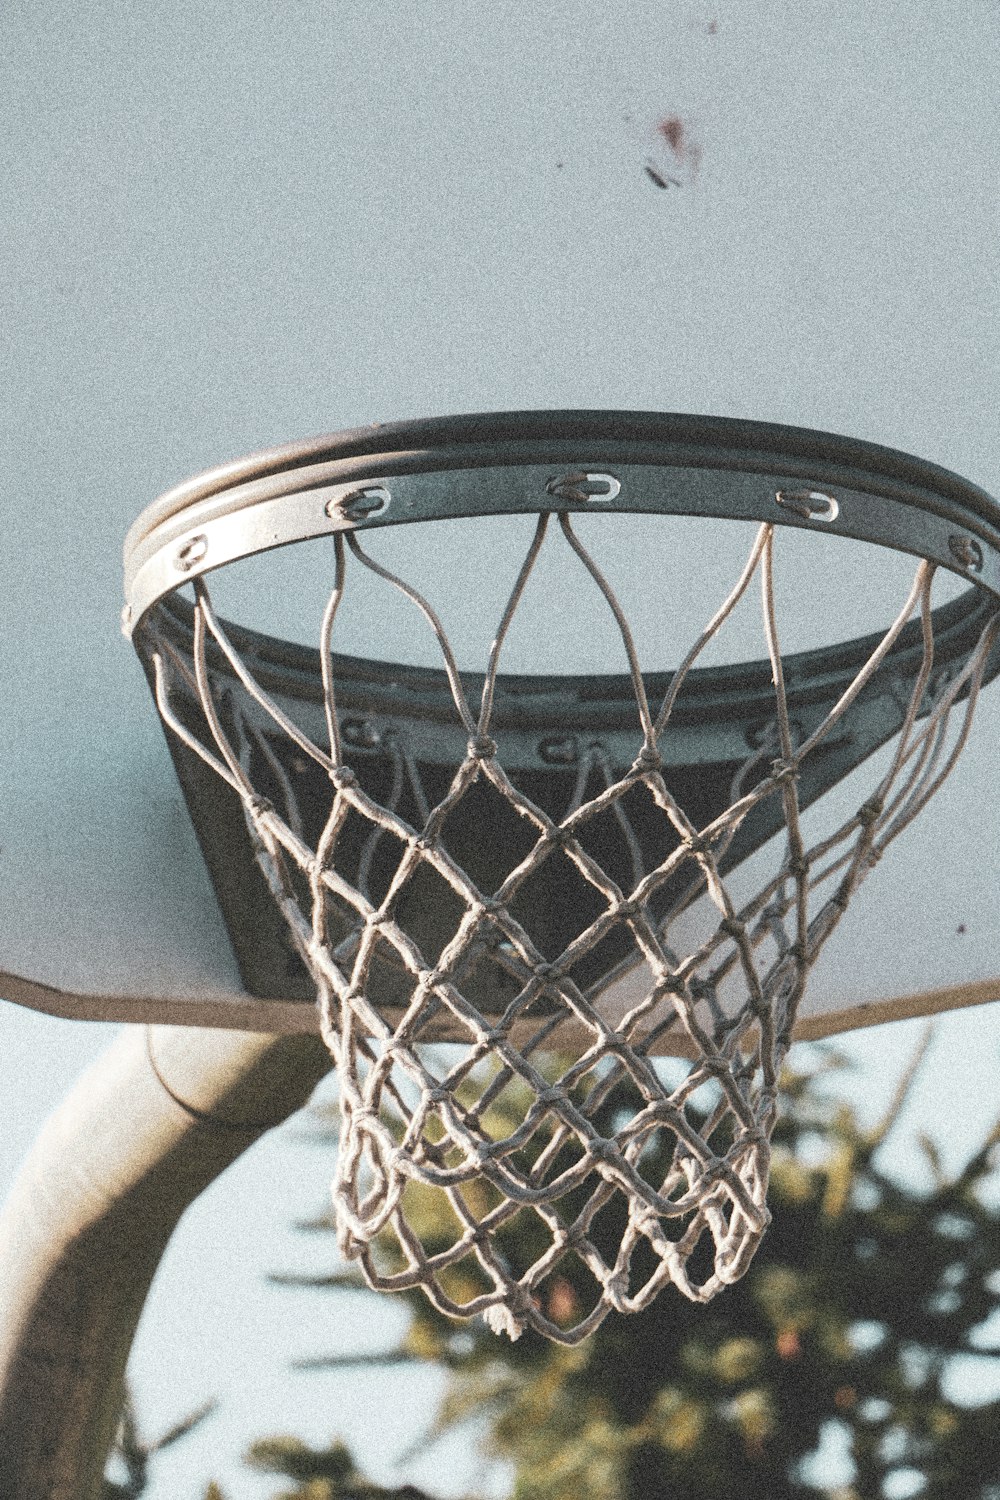 a close up of a basketball hoop with a tree in the background